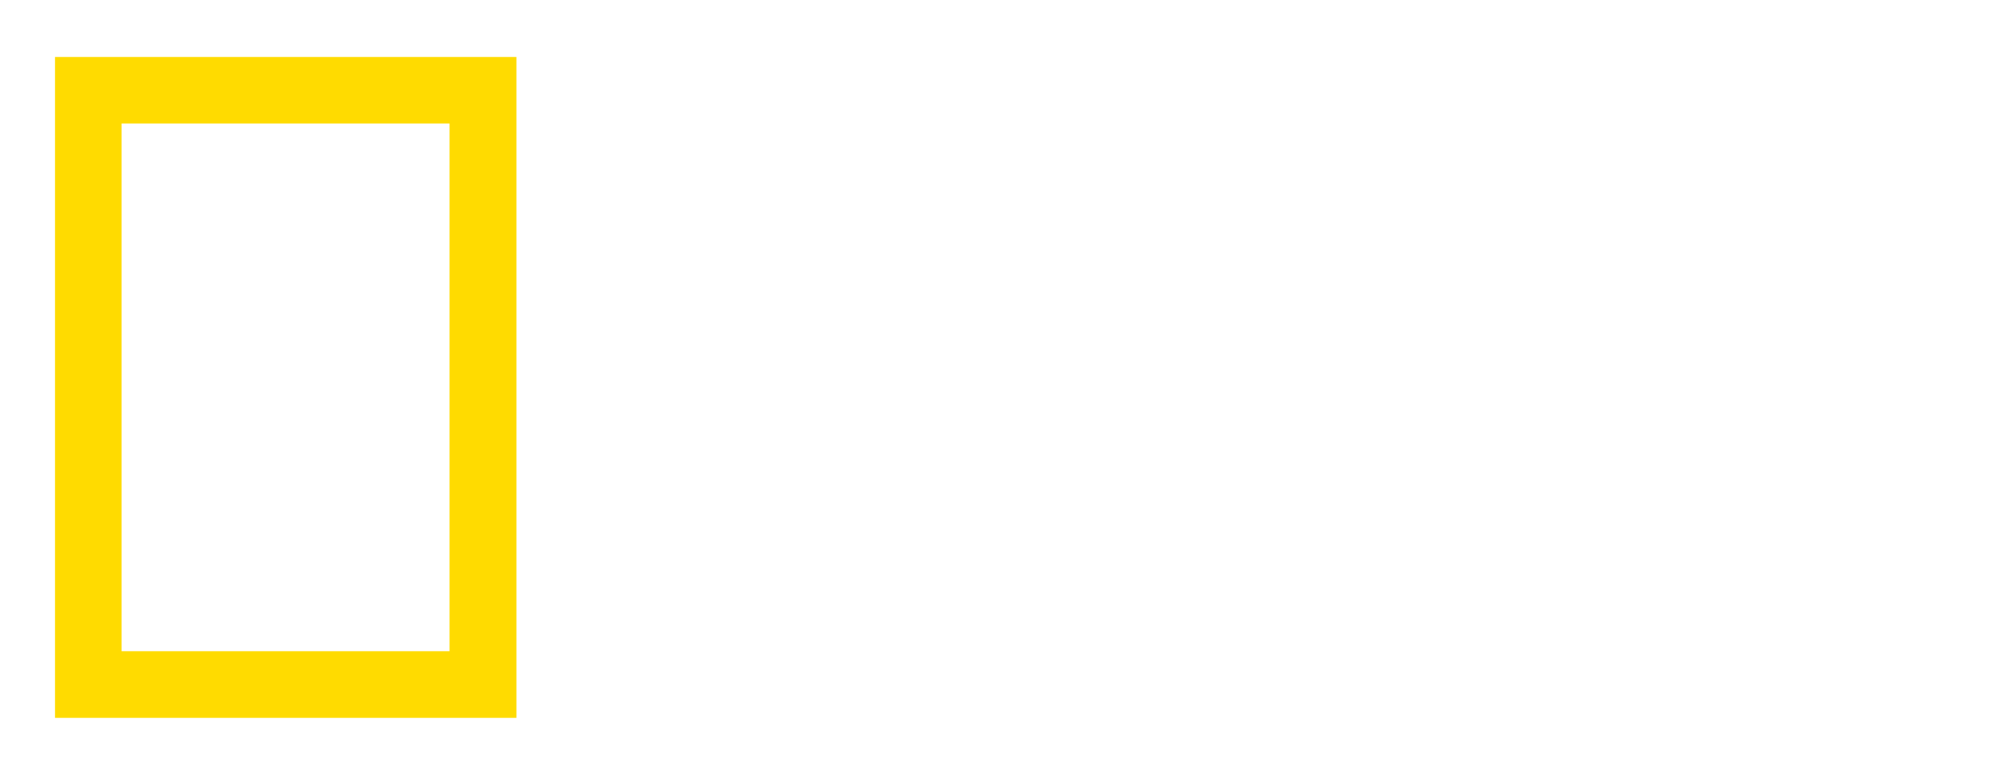 National Geographic Channel_white logo.png